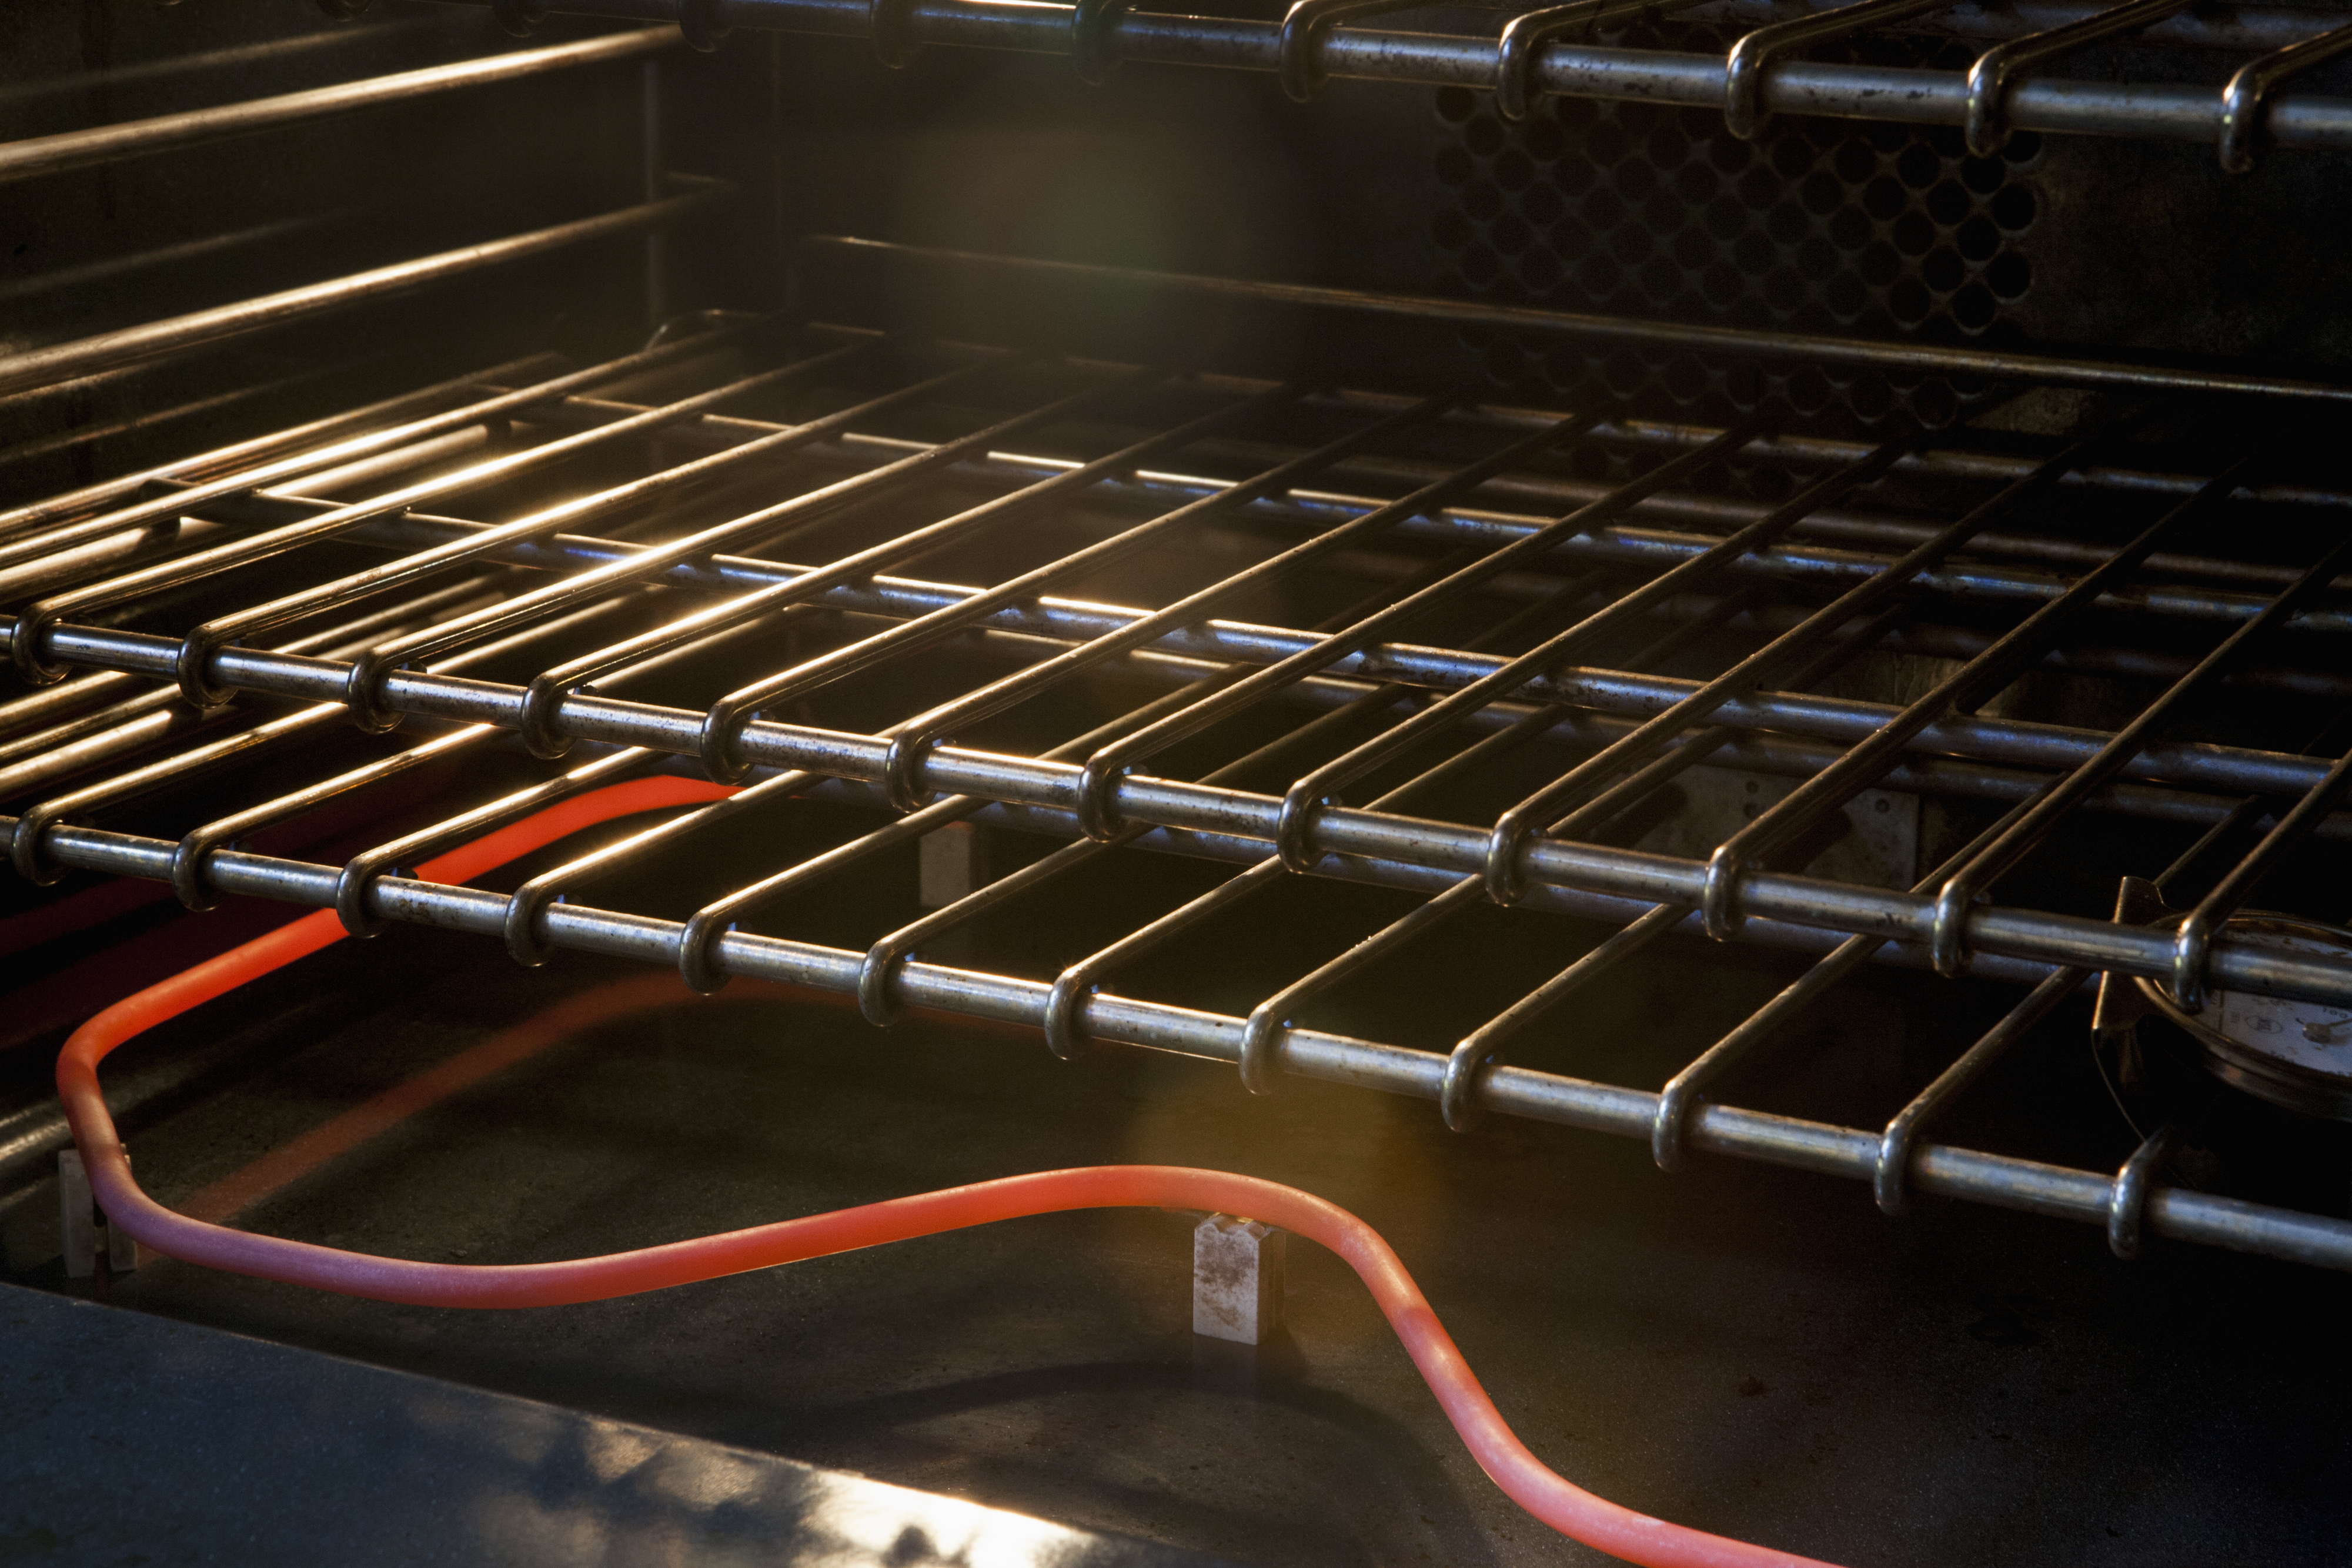 A close-up view of an empty grill with glowing heating elements